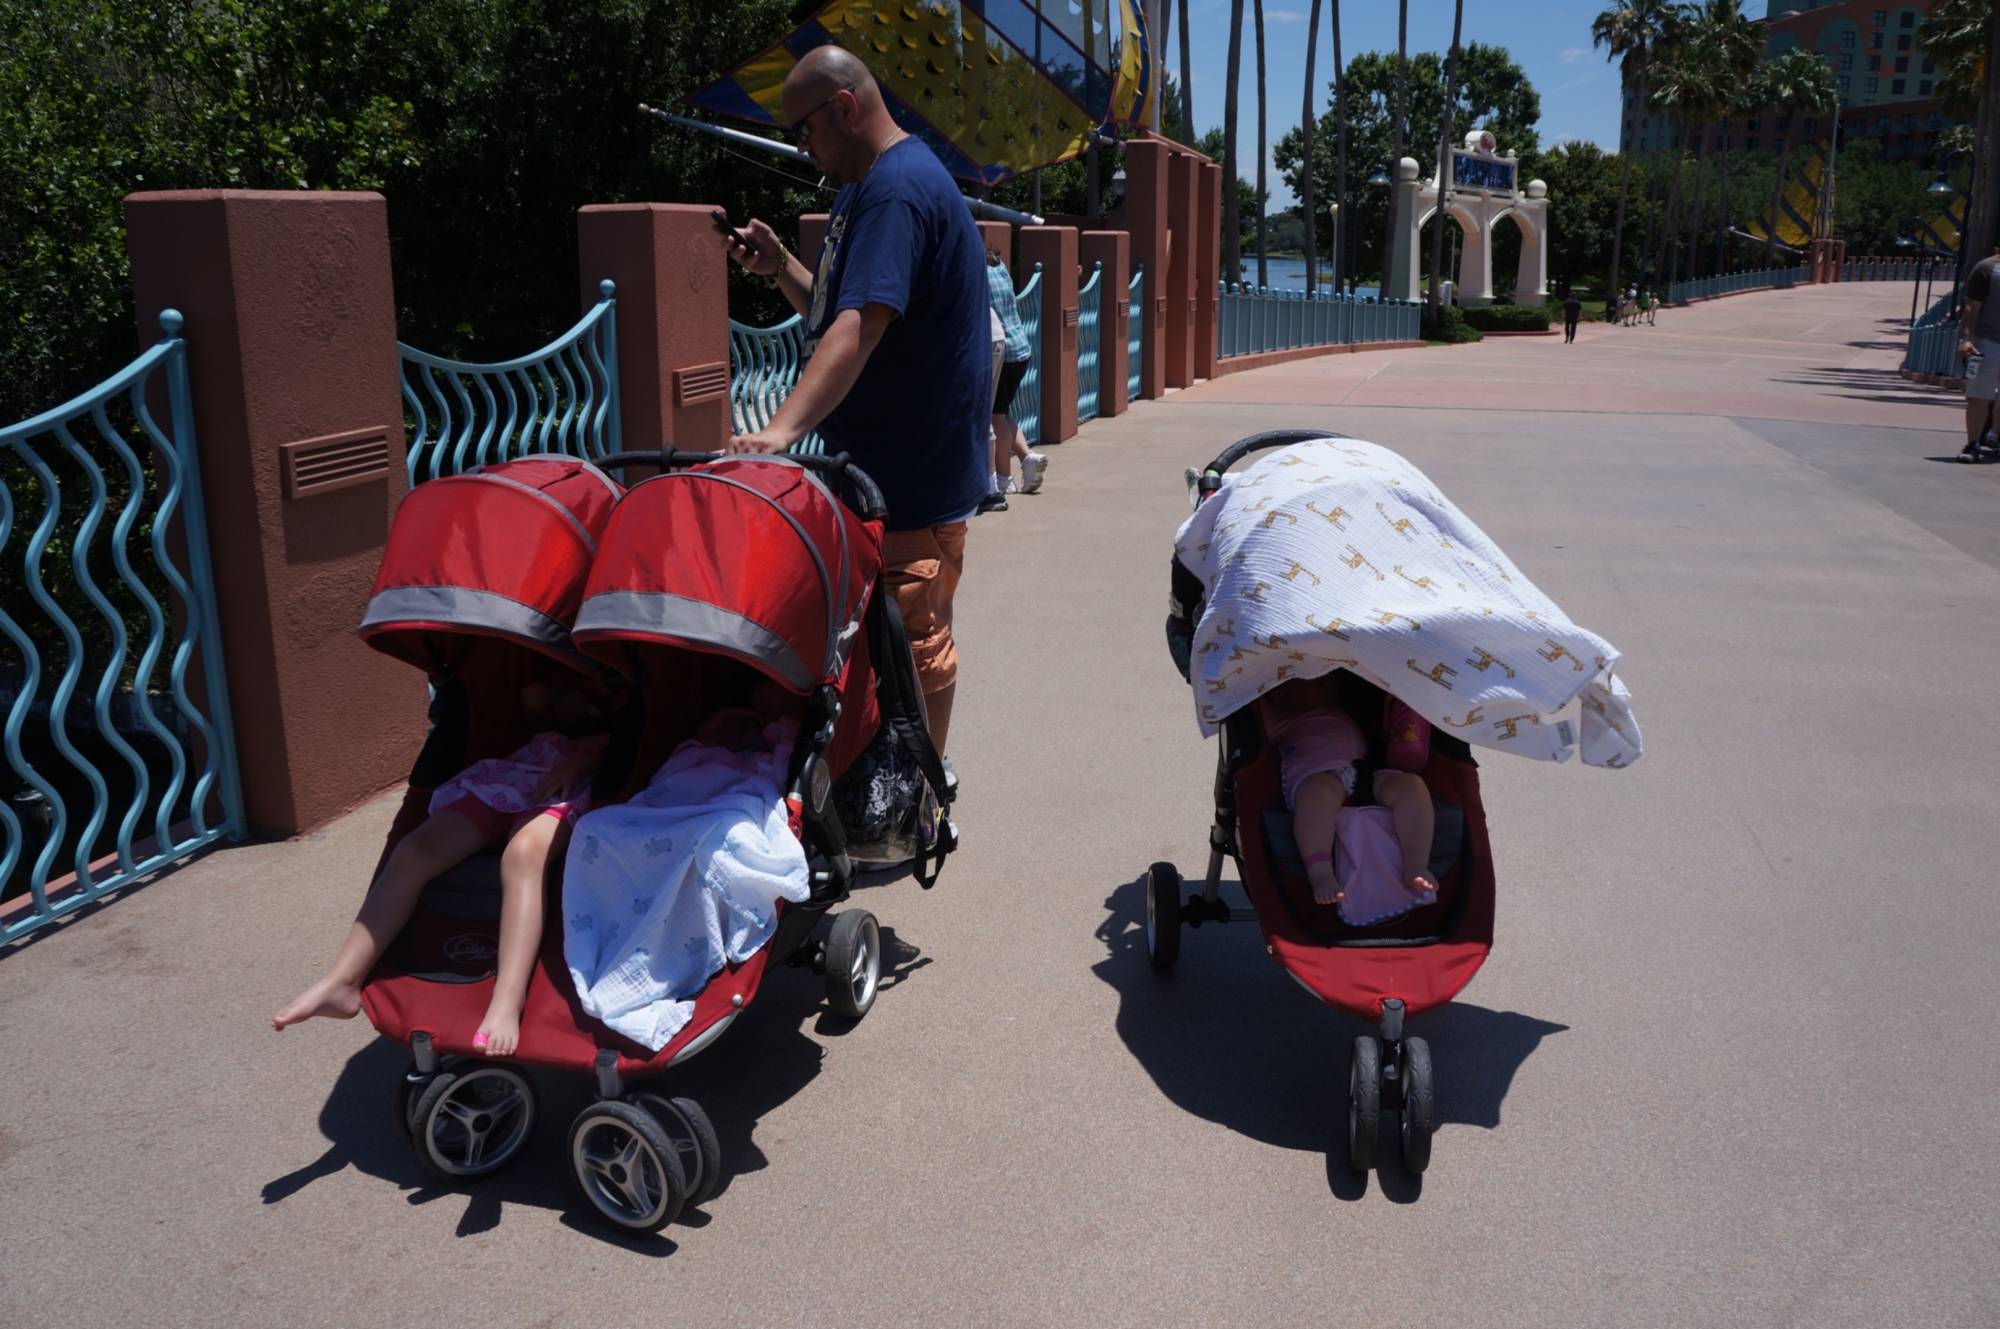 Advice on whether to let your kids nap in their stroller versus going back to your resort | PassPorter.com